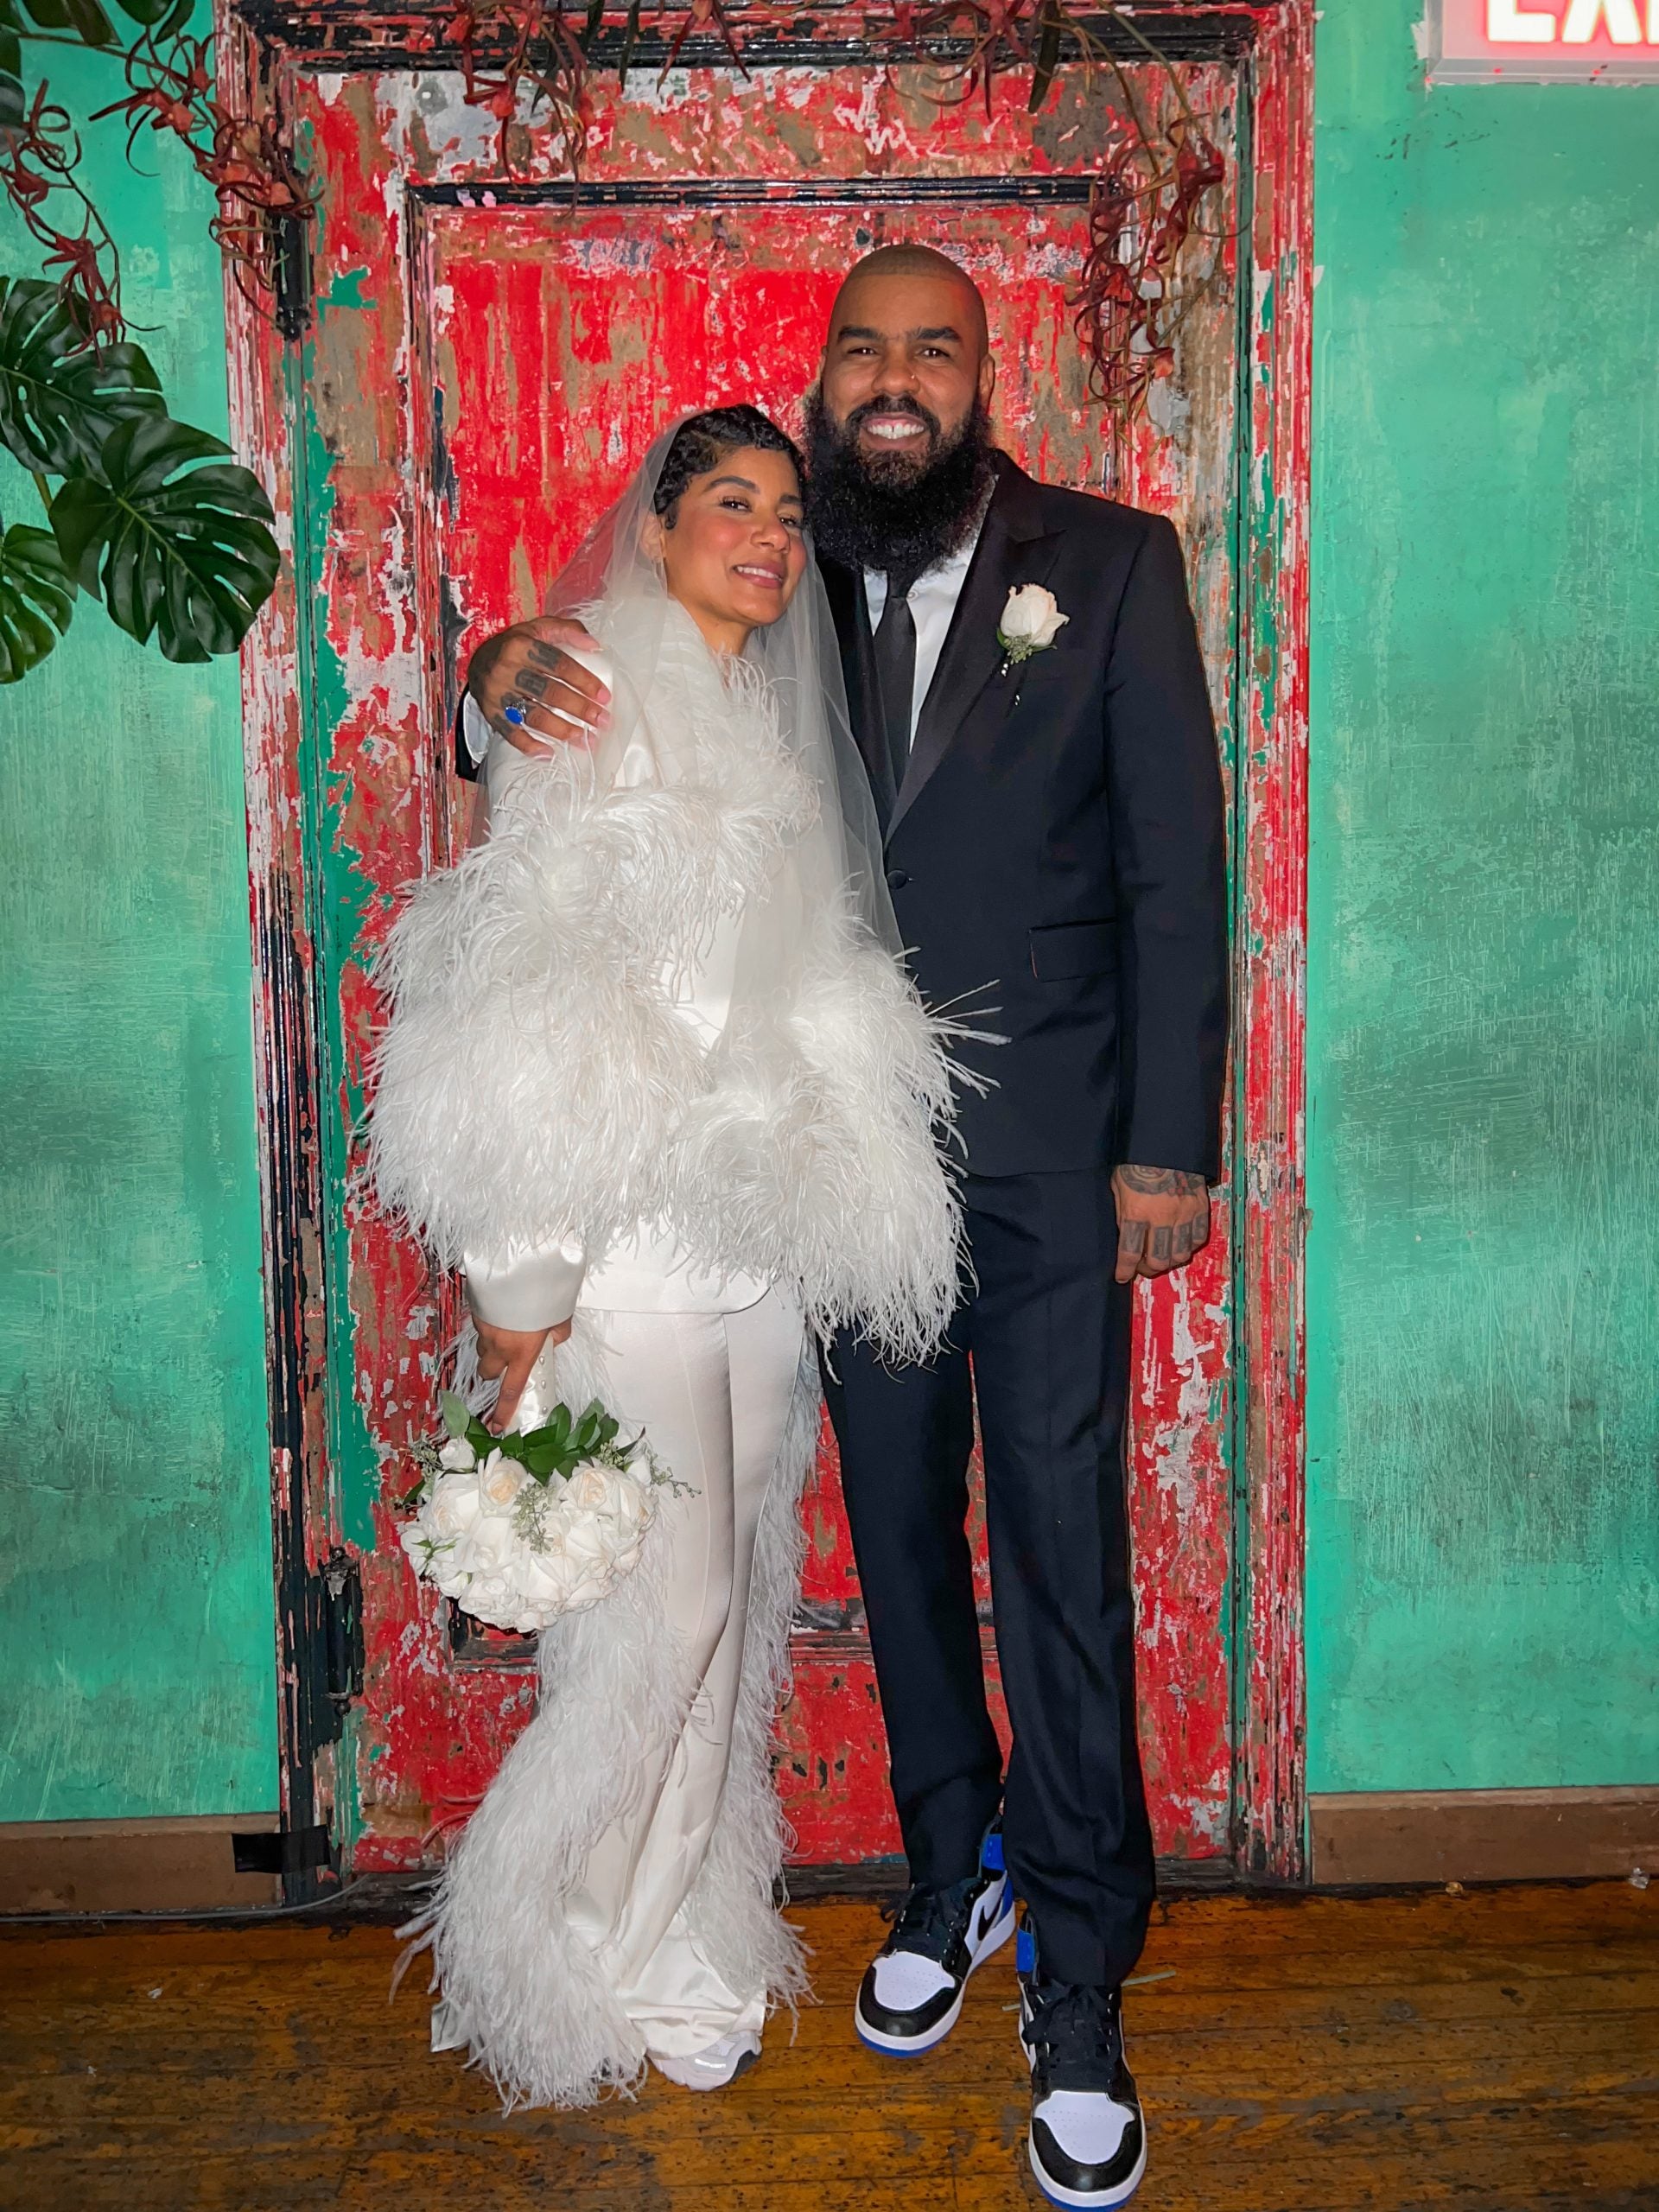 Bridal Bliss: With Ceremonies At City Hall And A Mosque, Aiesha And Rapper Stalley's Wedding Was An 'All-Day Celebration'